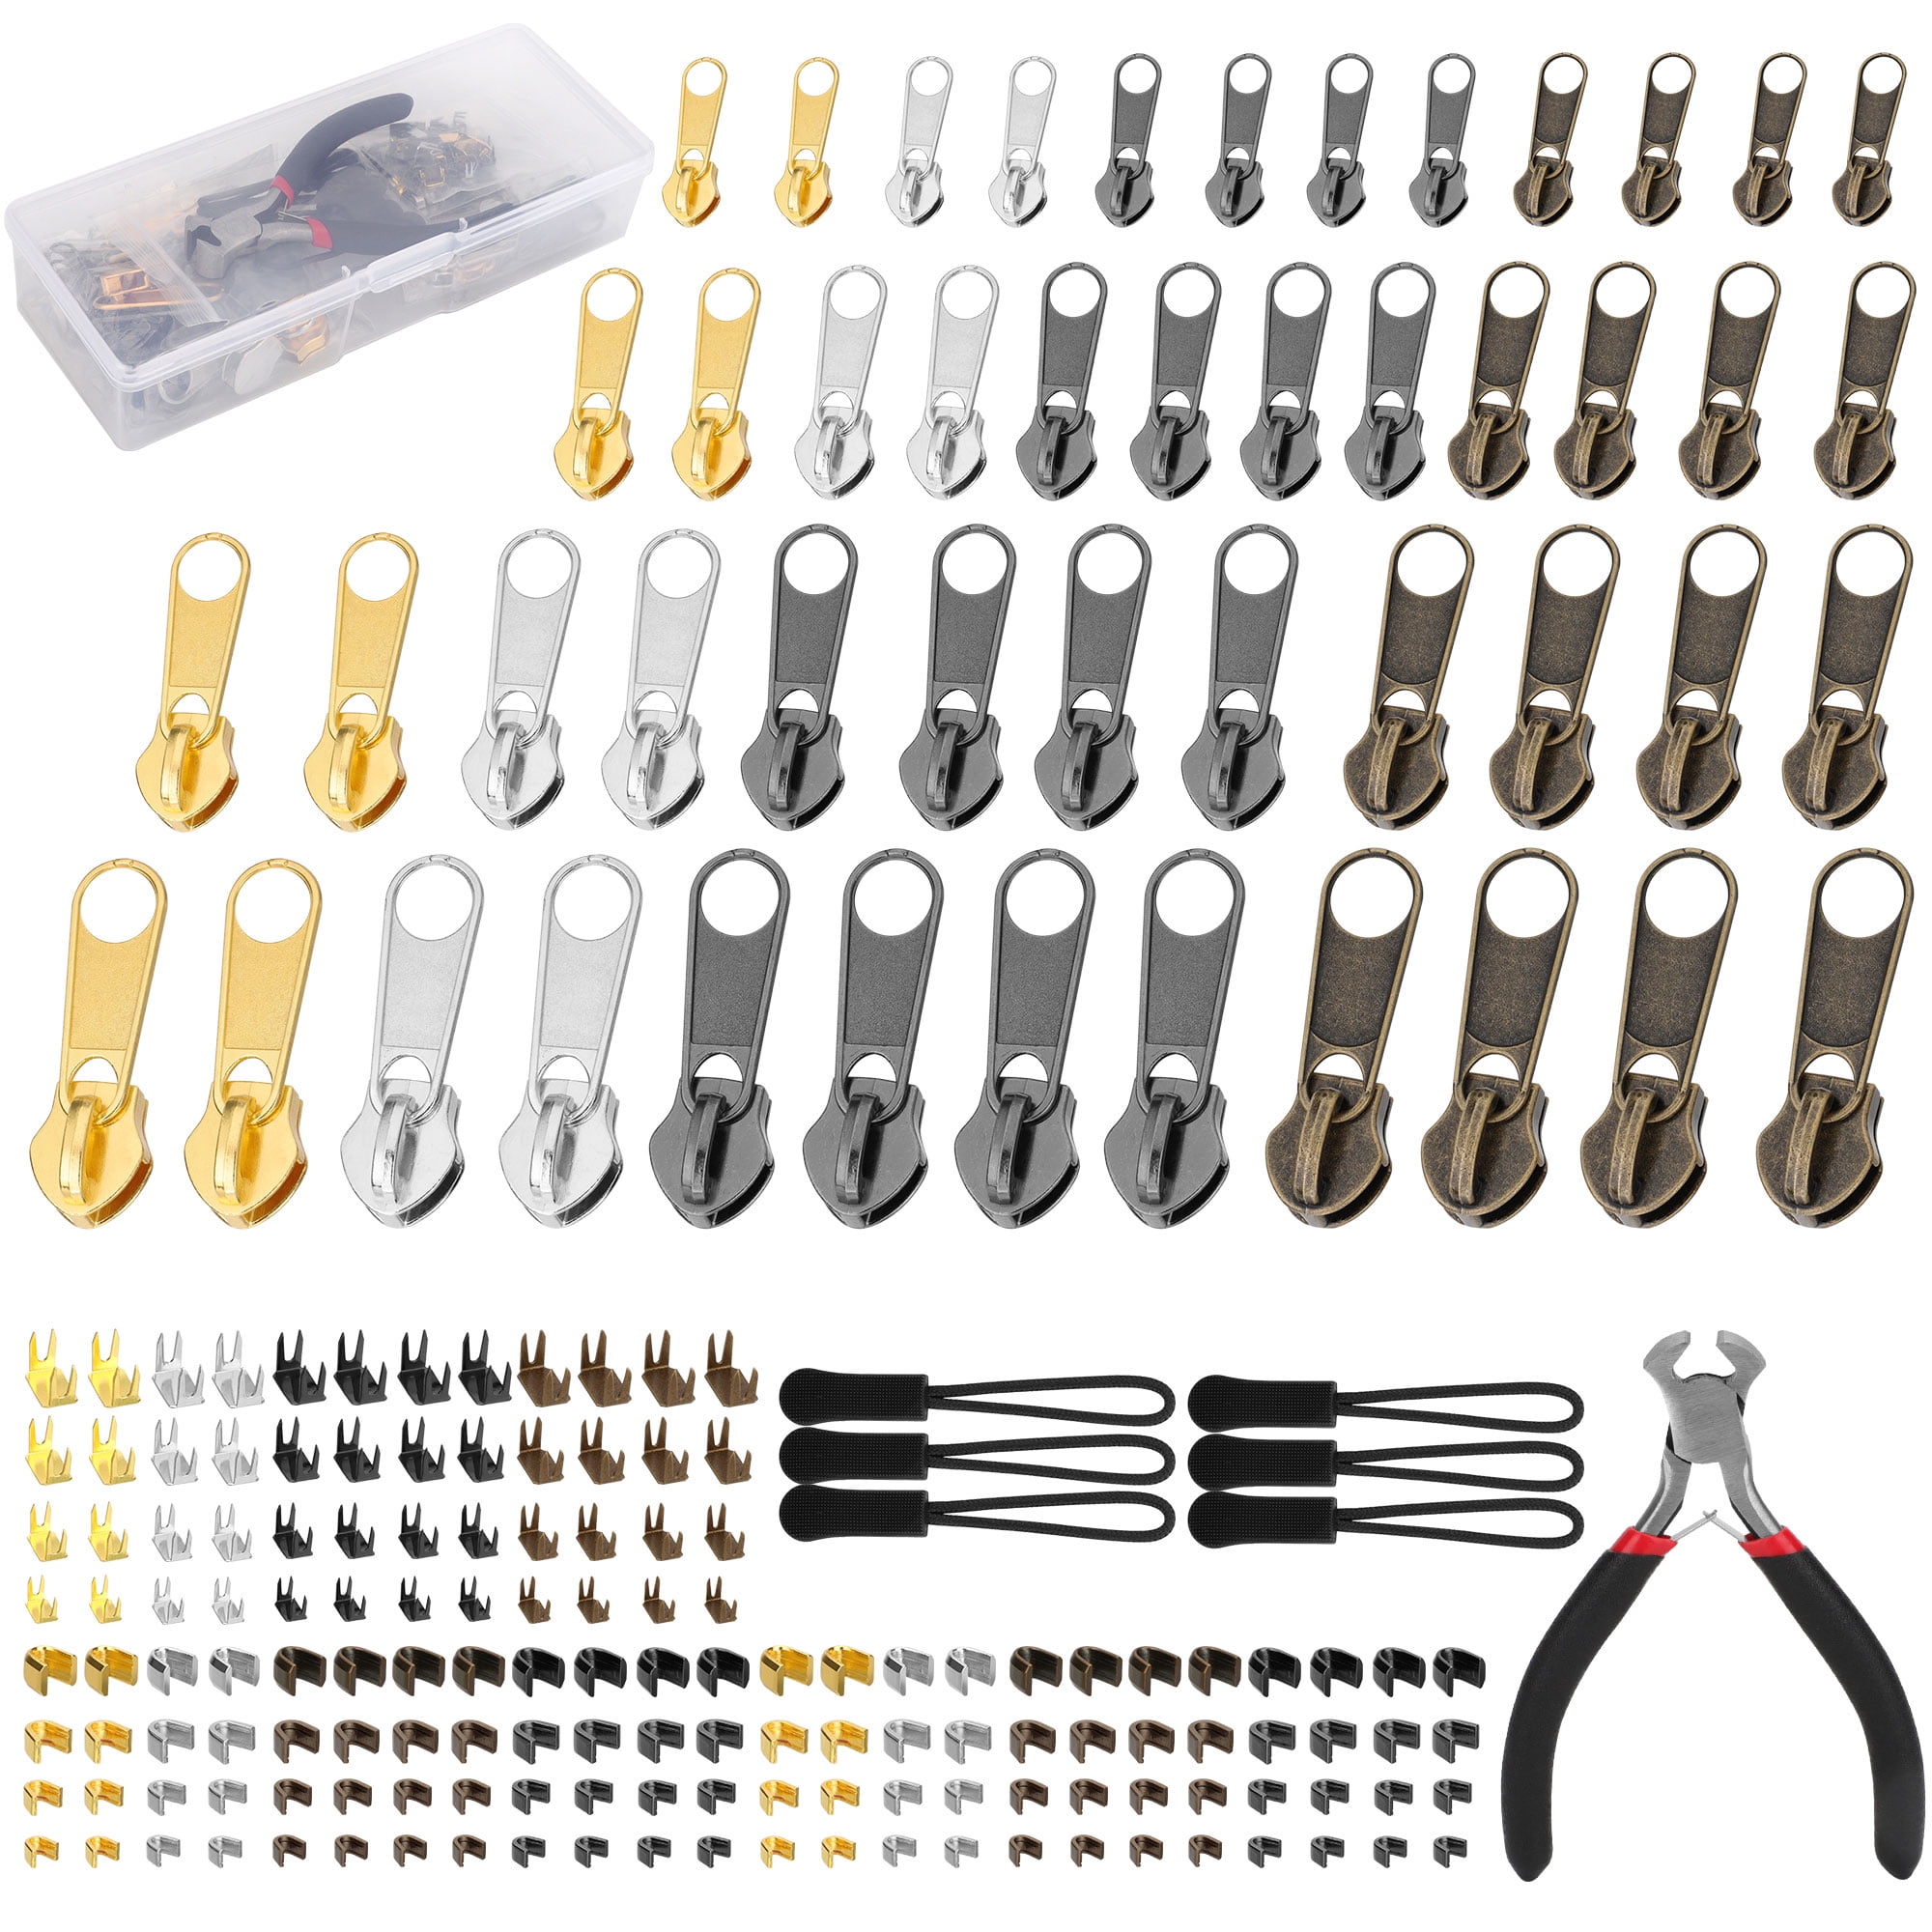 Zipper Repair Kit 197 Pcs Zipper Replacement with Two Installation Pliers  for Sleeping Bags Jacket Tent Luggage Backpacks